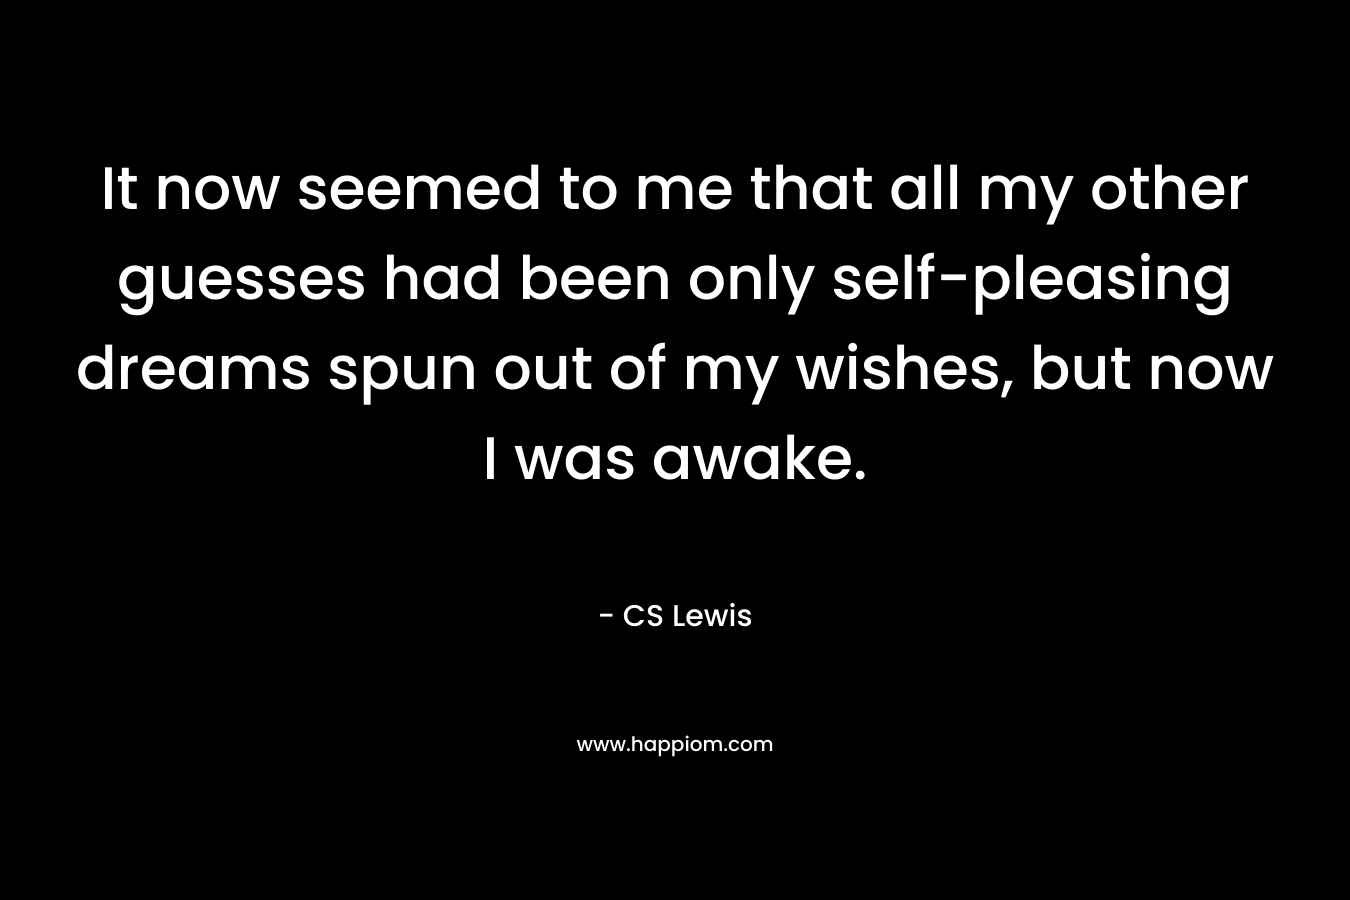 It now seemed to me that all my other guesses had been only self-pleasing dreams spun out of my wishes, but now I was awake. – CS Lewis